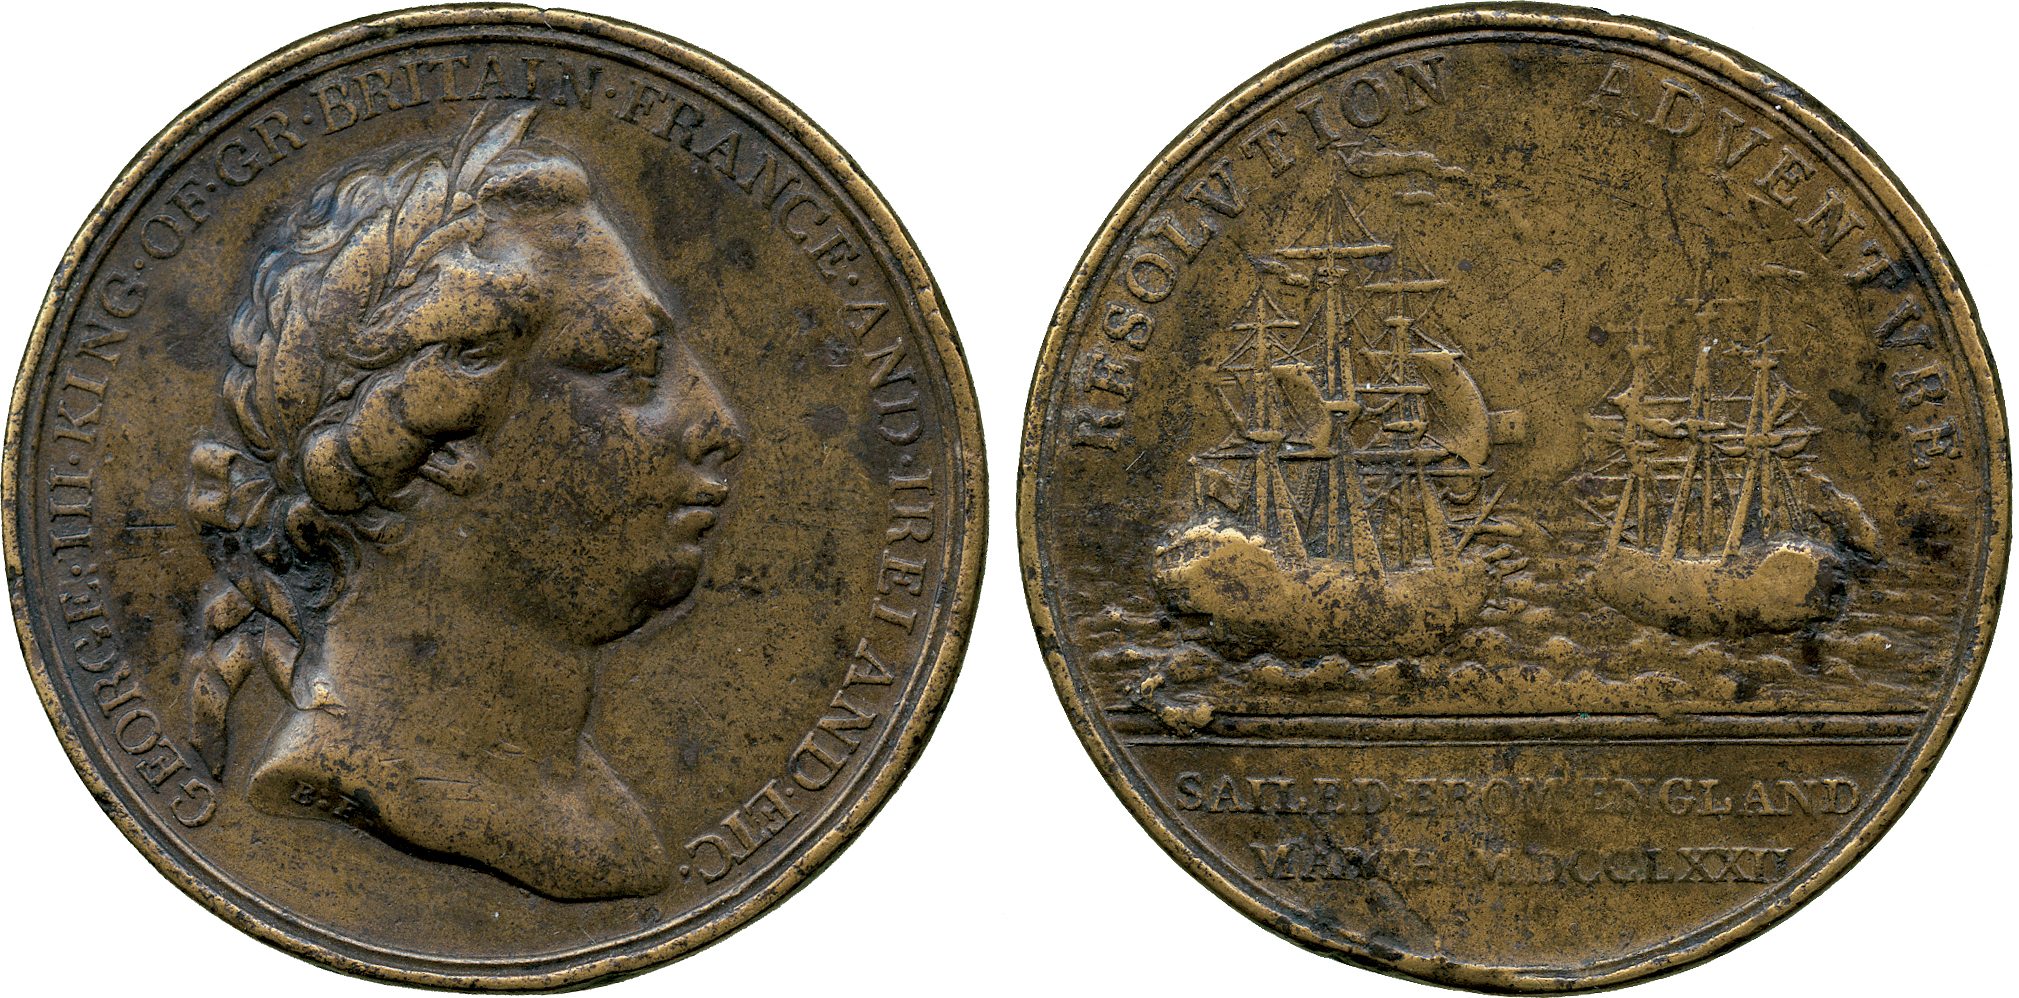 COMMEMORATIVE MEDALS, BRITISH MEDALS, George III, The Resolution and Adventure Medal, 1772, Bronze